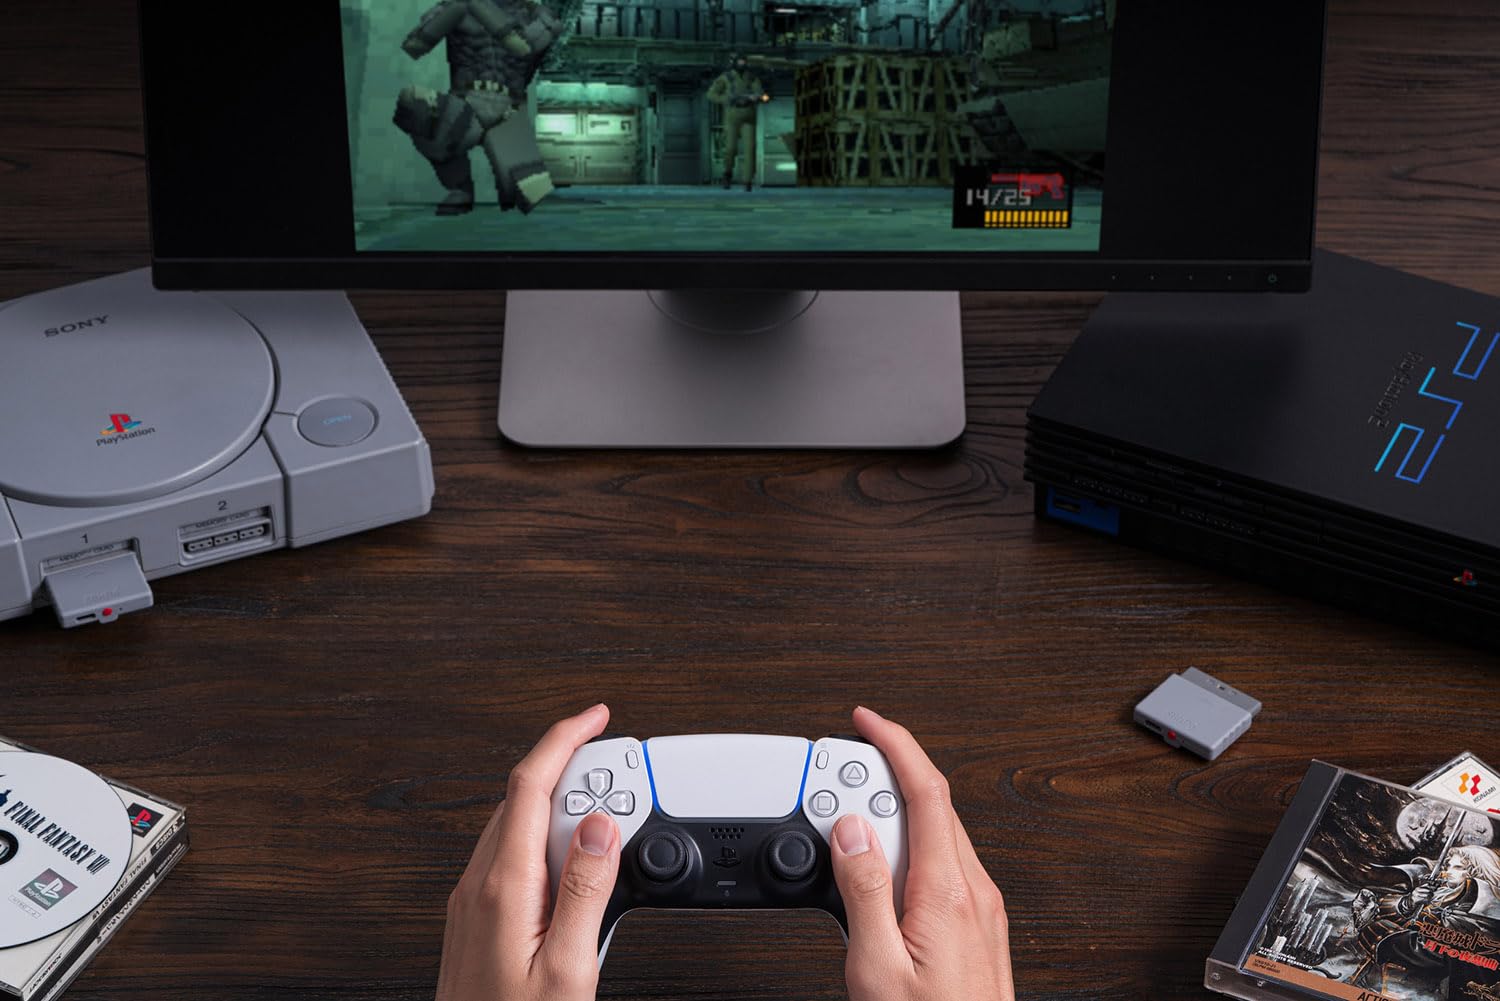 8BitDo New Adapter Allows Gamers to Use Modern Wireless Controllers on PS2 and PS1: Here's How